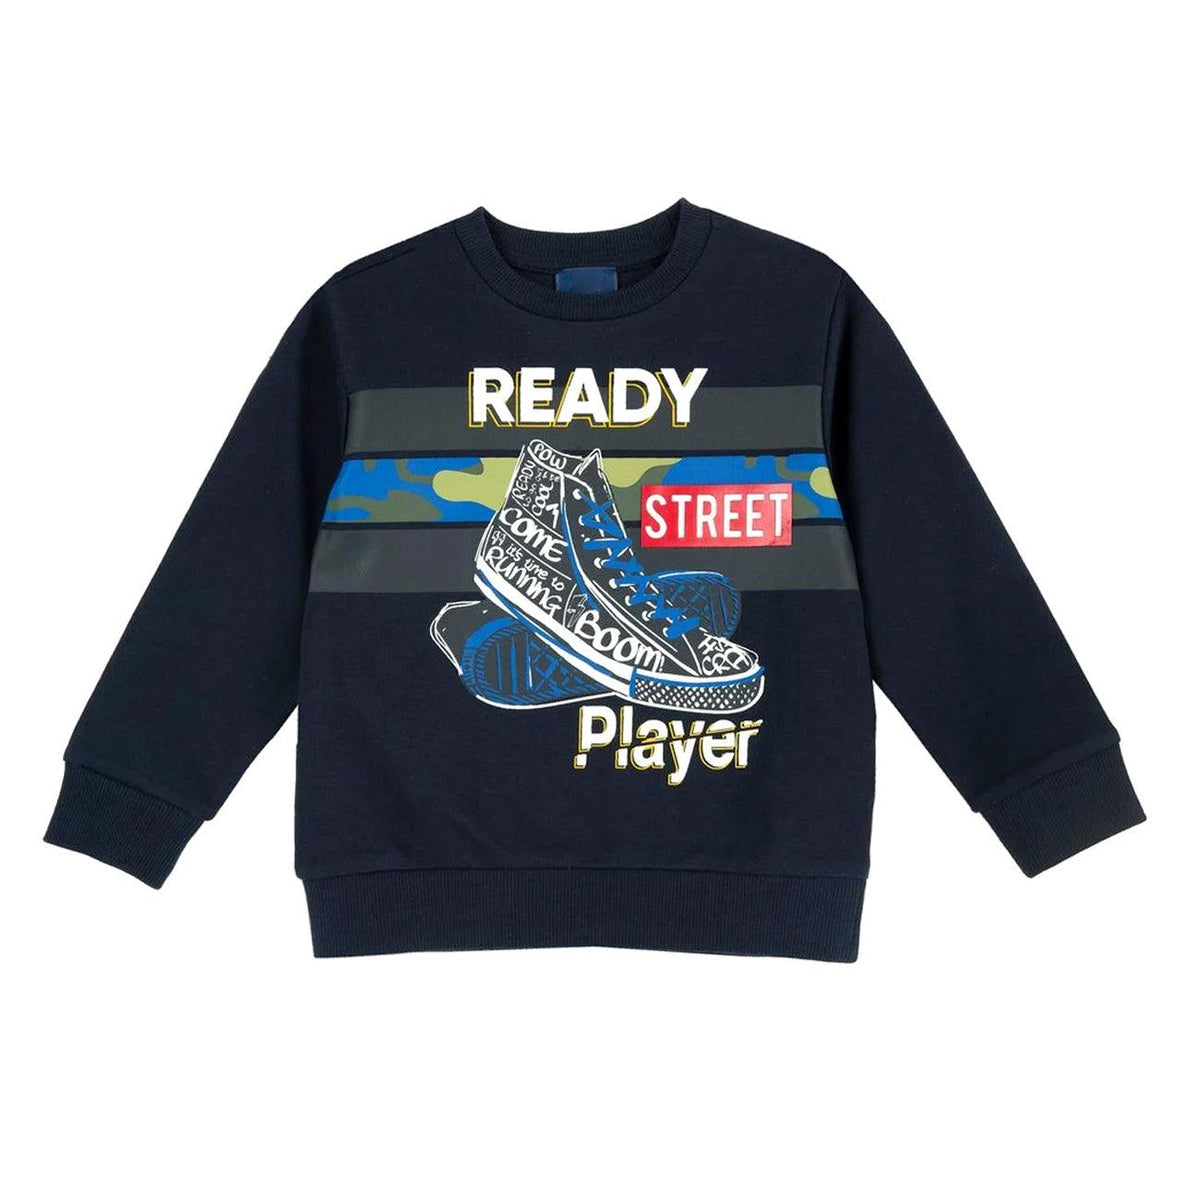 Premium Quality Navy Graphic Printed Sweatshirt For Boys (MY-10449) - Brands River